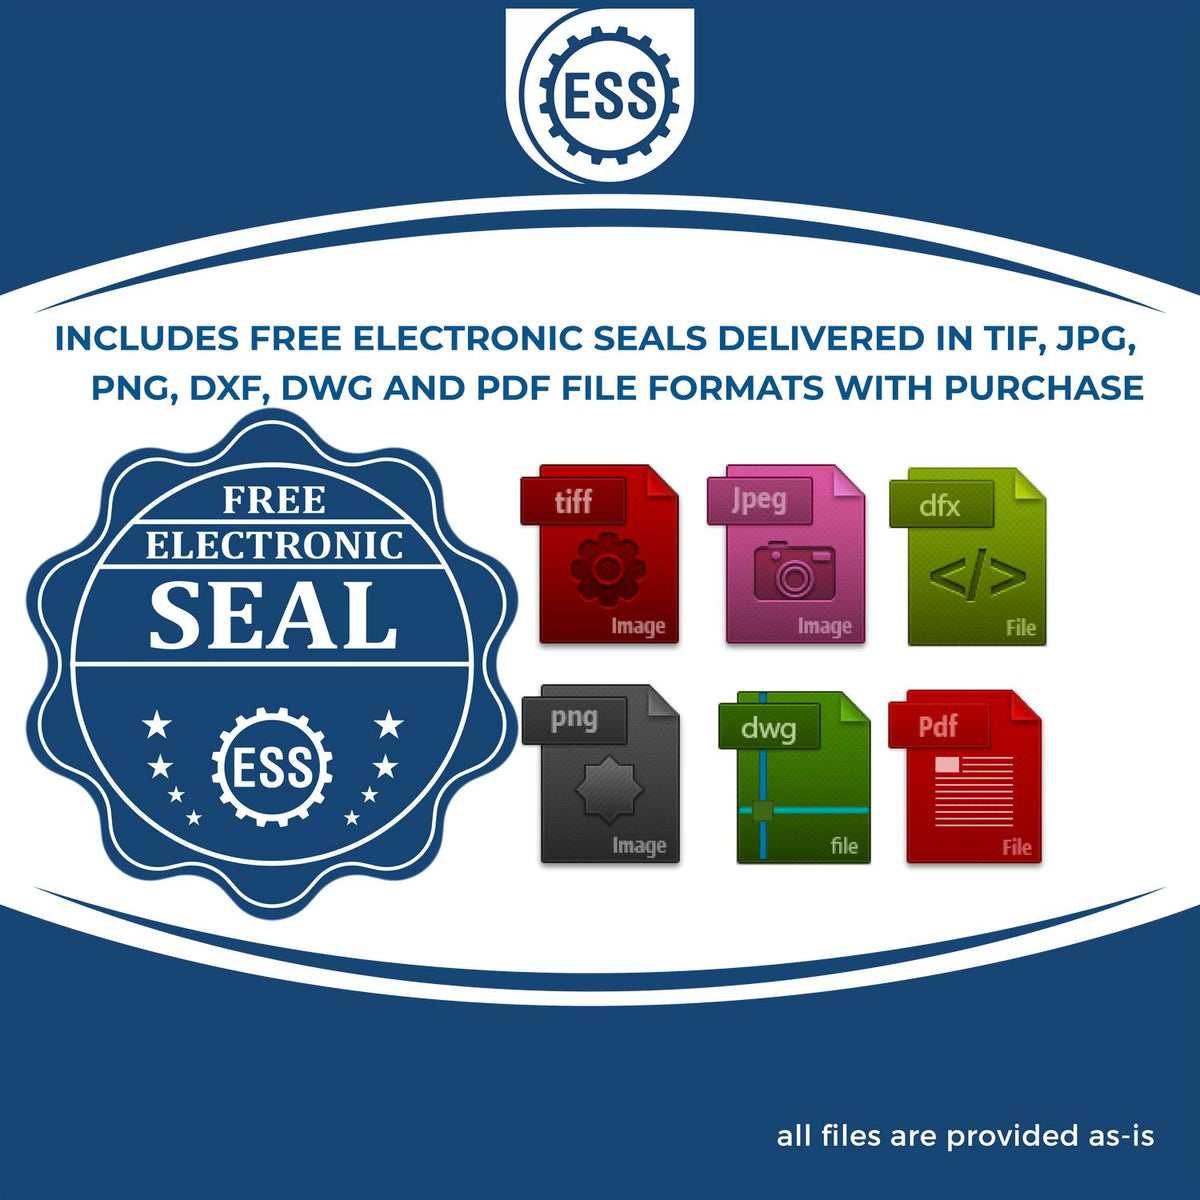 An infographic for the free electronic seal for the State of District of Columbia Extended Long Reach Geologist Seal illustrating the different file type icons such as DXF, DWG, TIF, JPG and PNG.